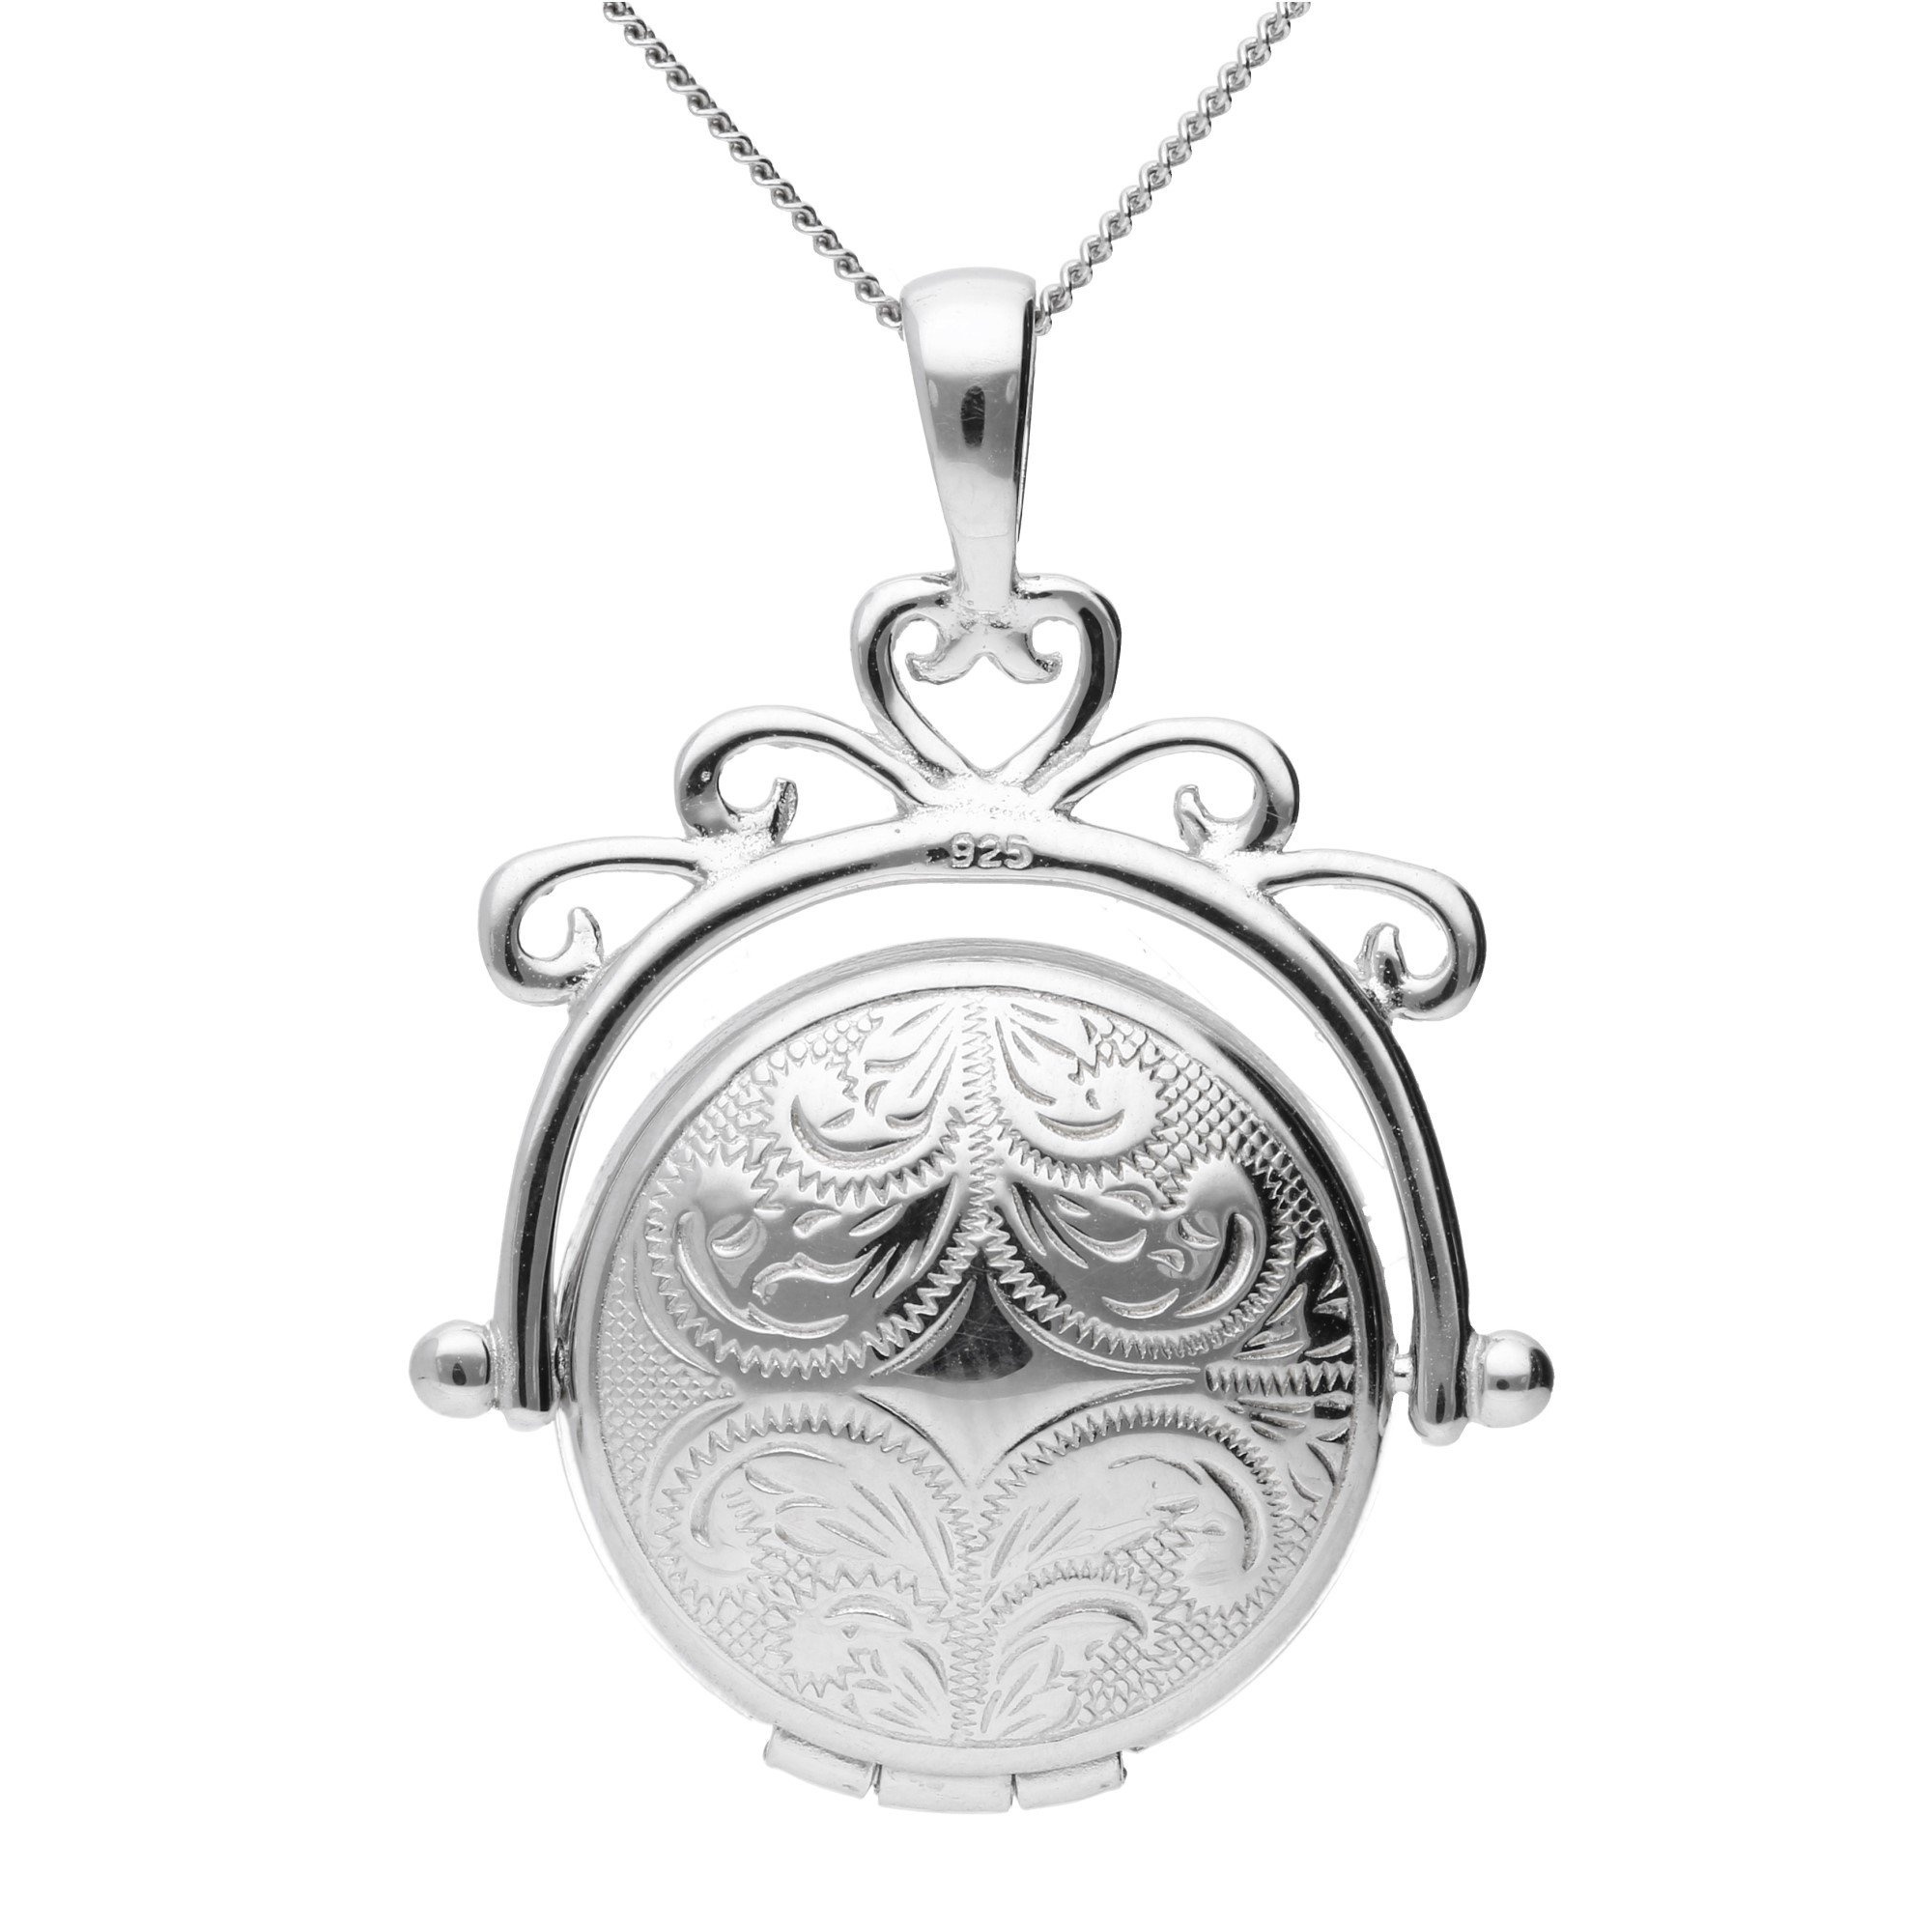 Silver round spinner locket, free insured delivery, UK-based jewelry store, 2000x2000 HD Handy